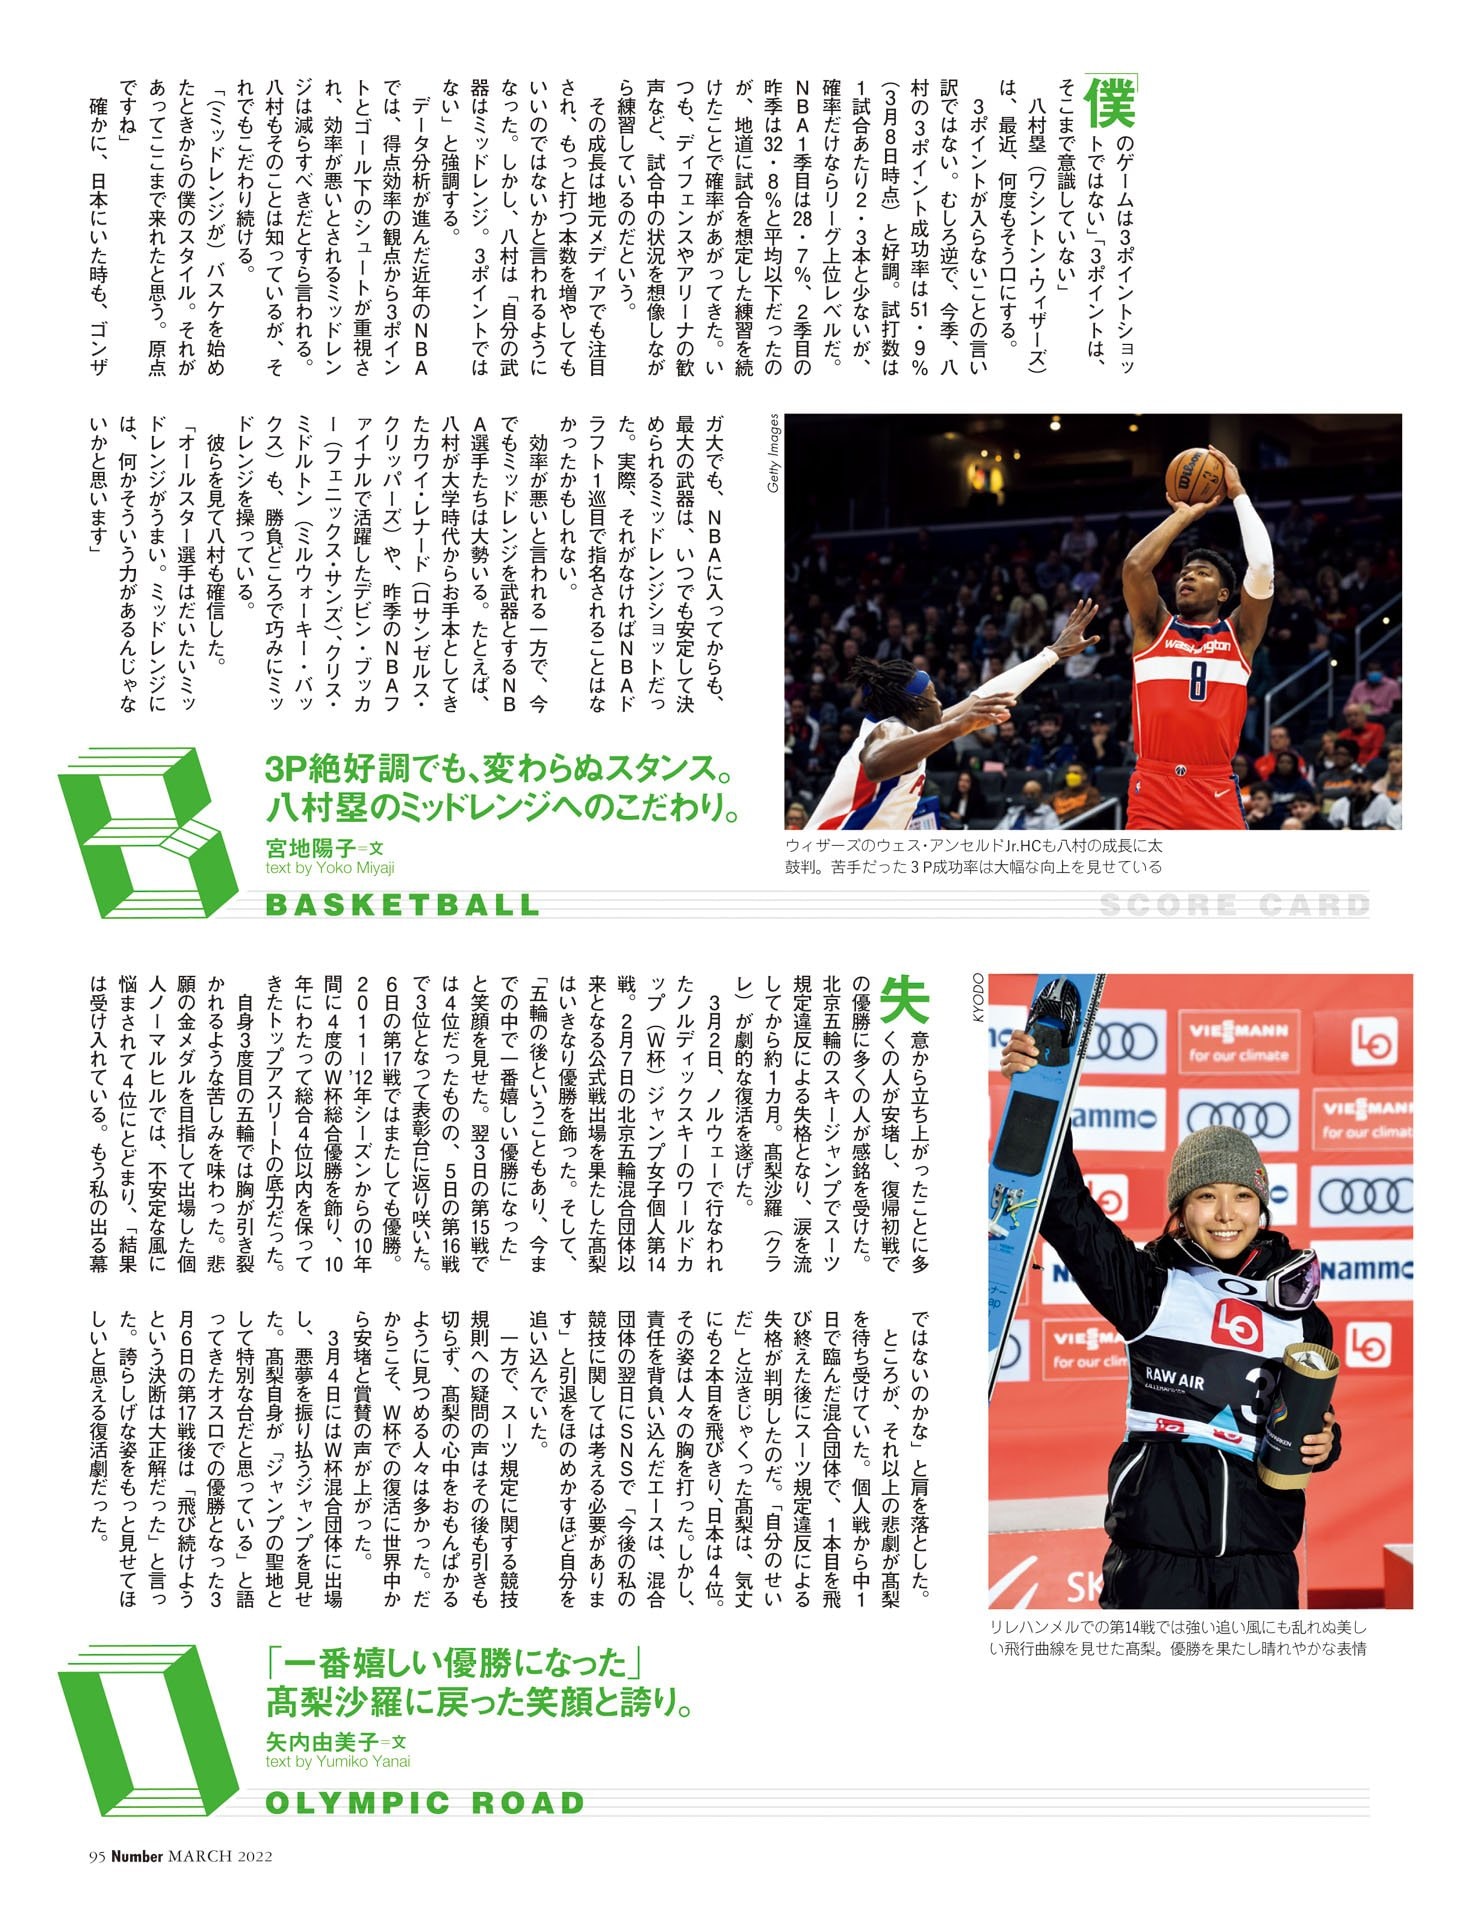 【SCORE CARD】BASKETBALL／OLYMPIC ROAD